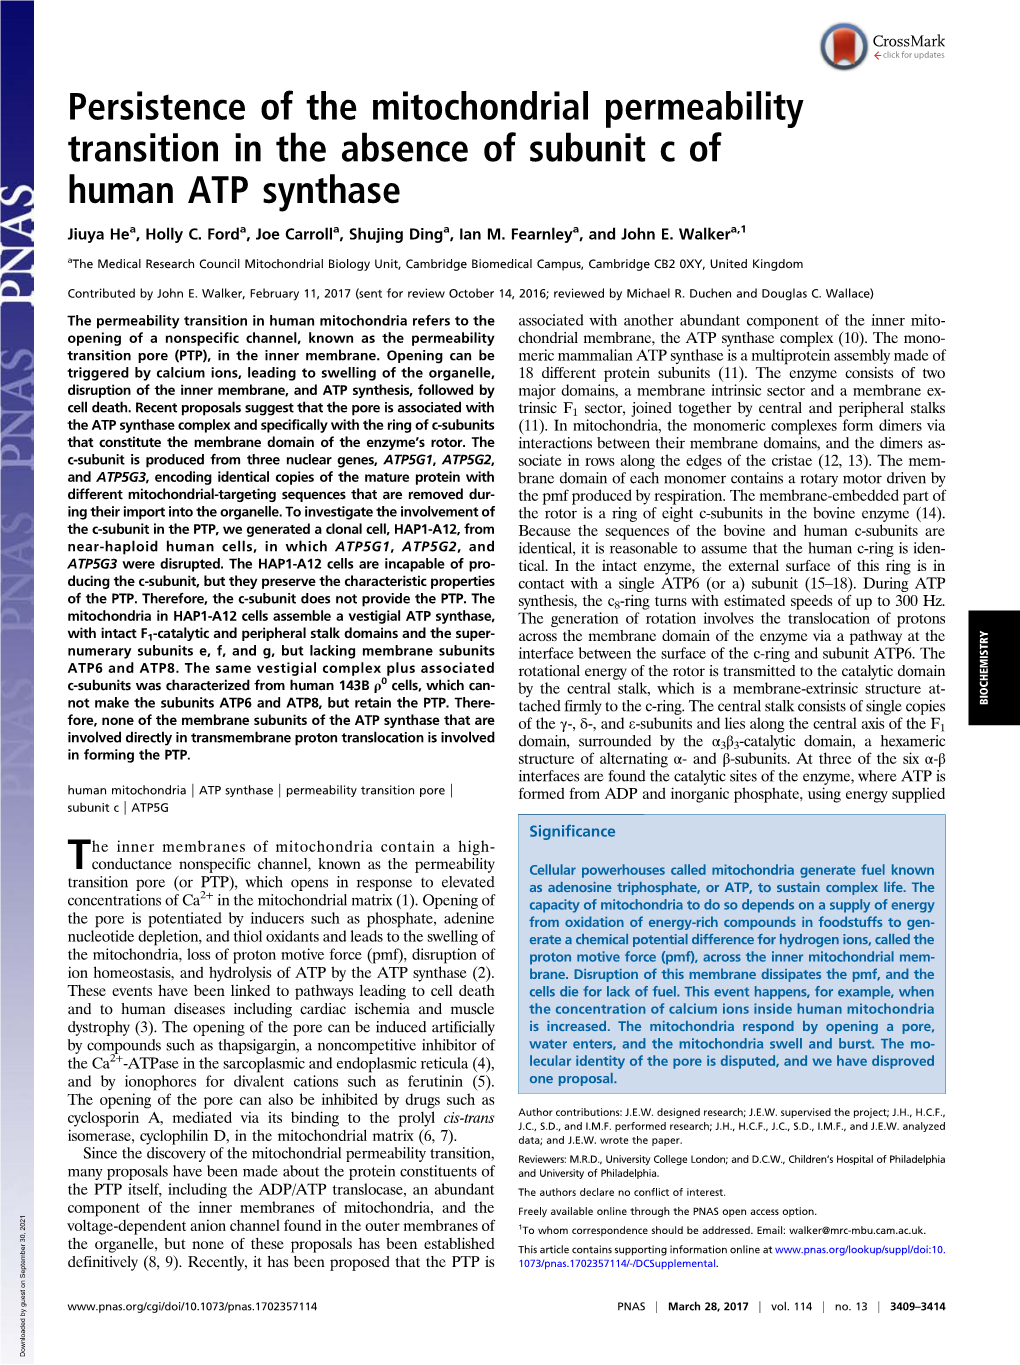 Persistence of the Mitochondrial Permeability Transition in the Absence of Subunit C of Human ATP Synthase